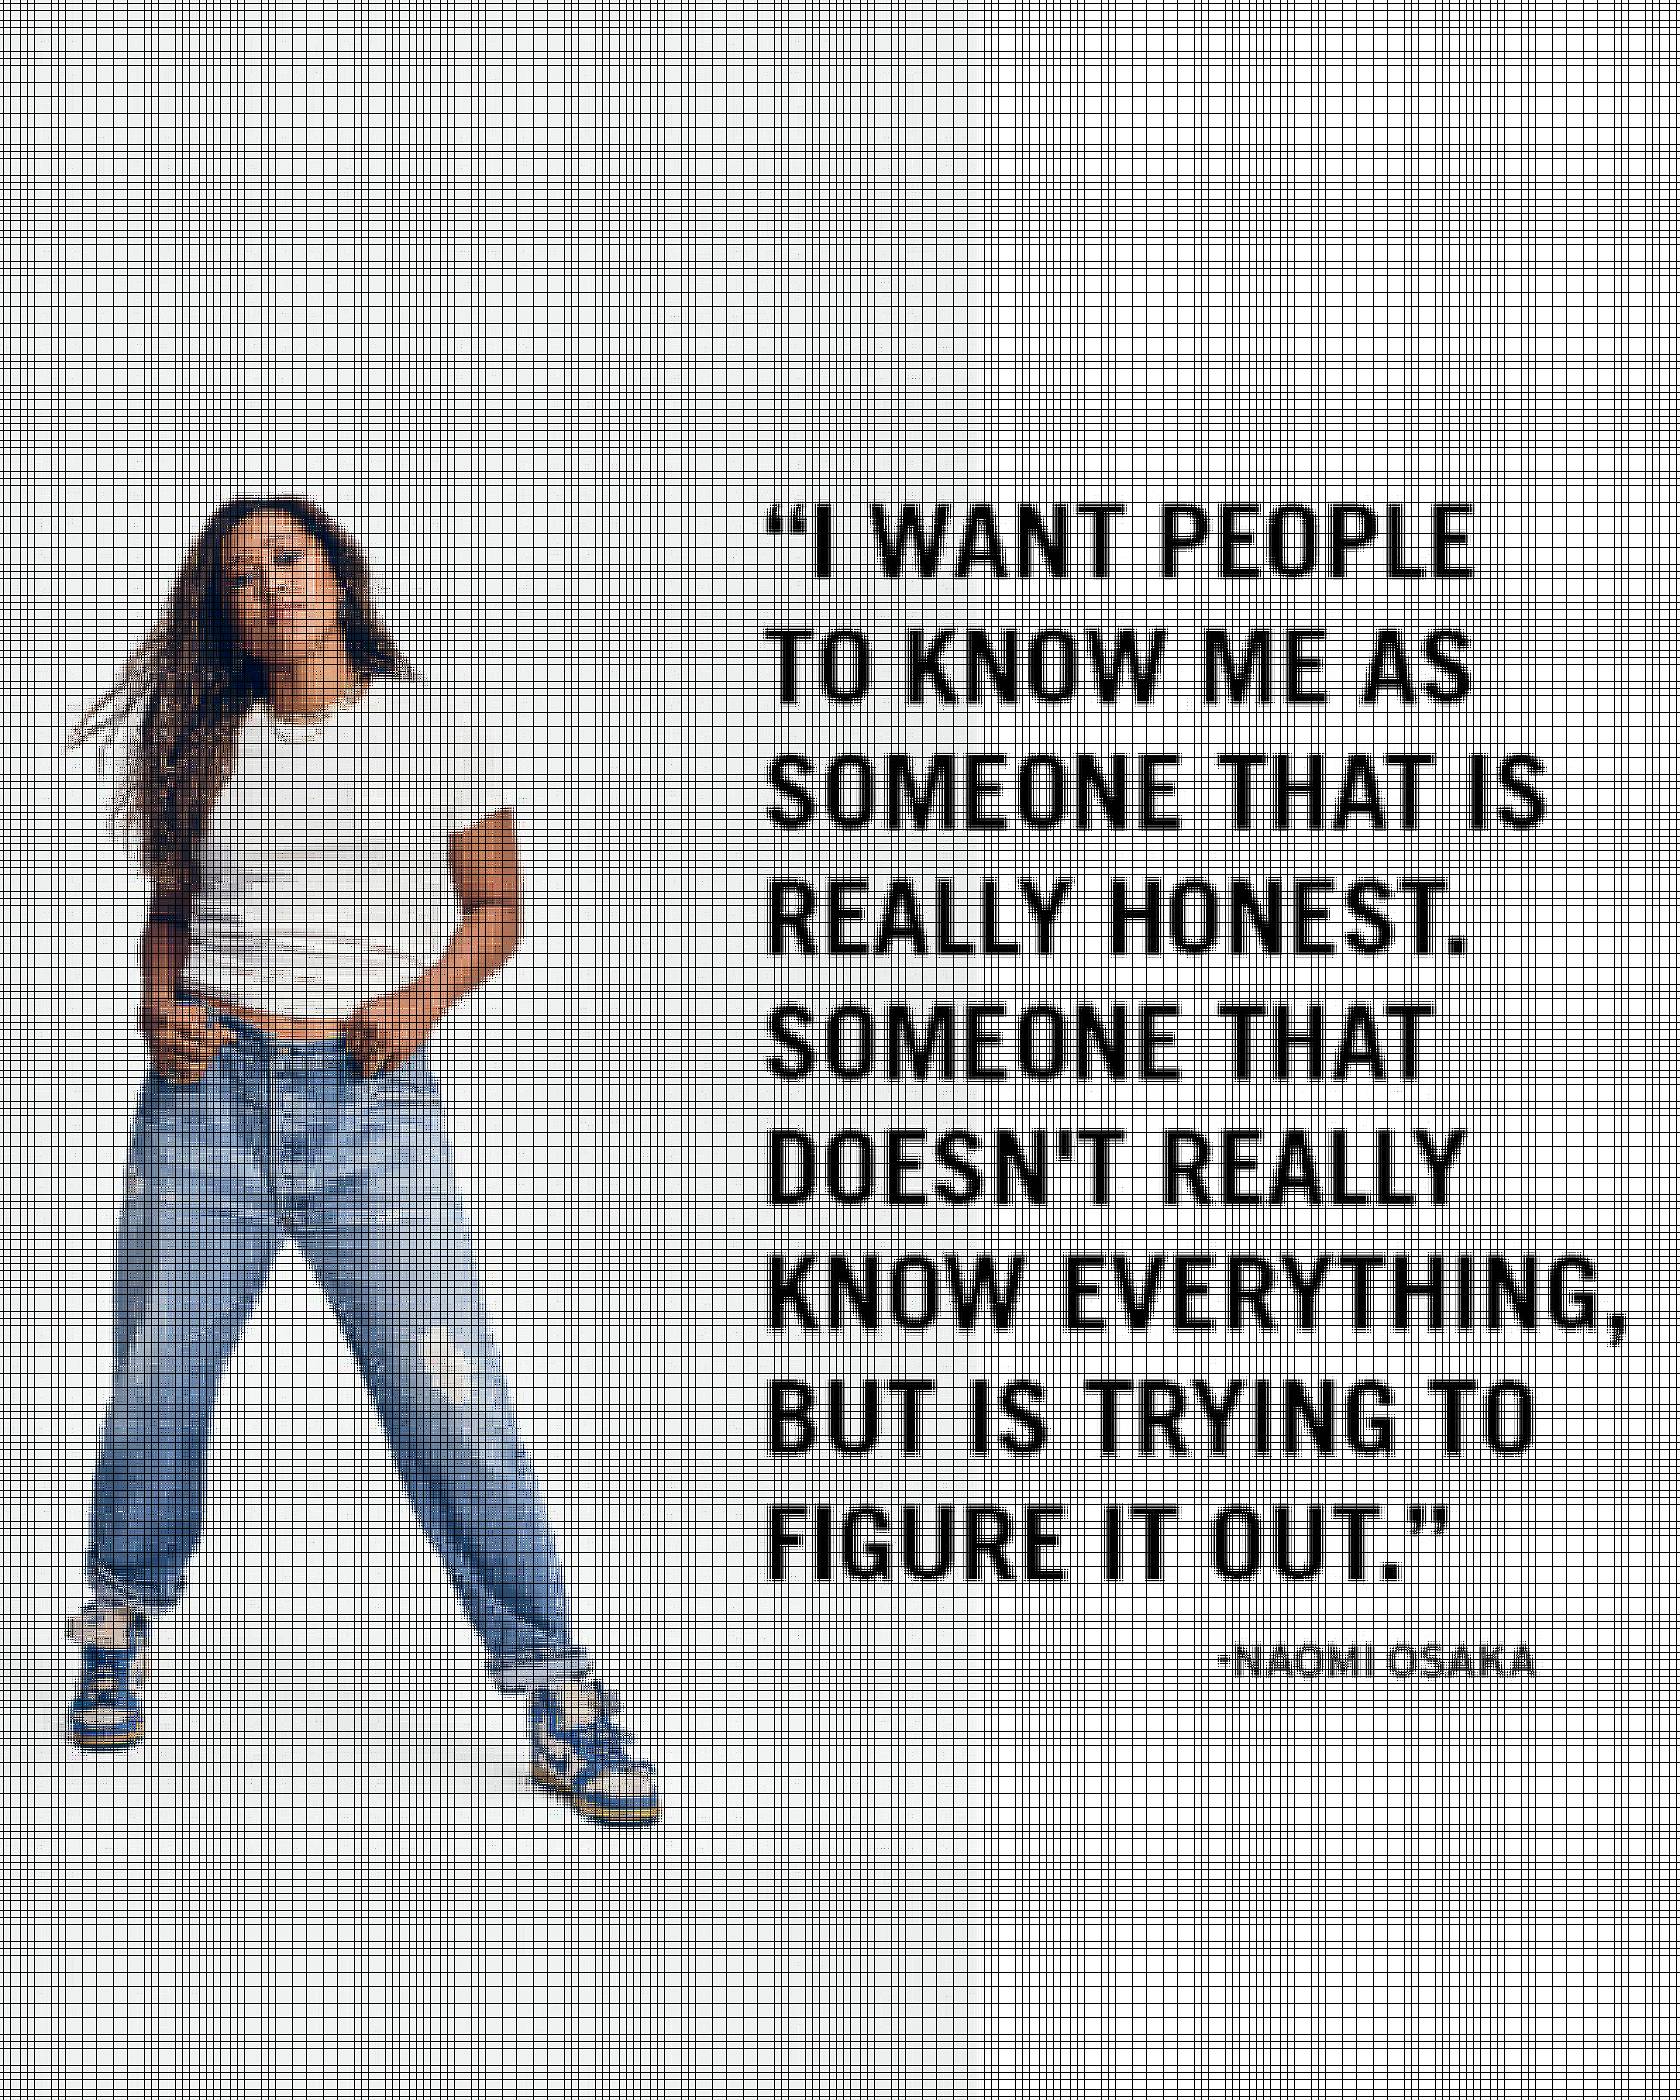 A photo of Naomi Osaka wearing Levi jeans and a white tee shirt with text overlaid saying, "I want people to know me as someone that is really honest. Someone that doesn't really know everything, but is trying to figure it out." - Naomi Osaka